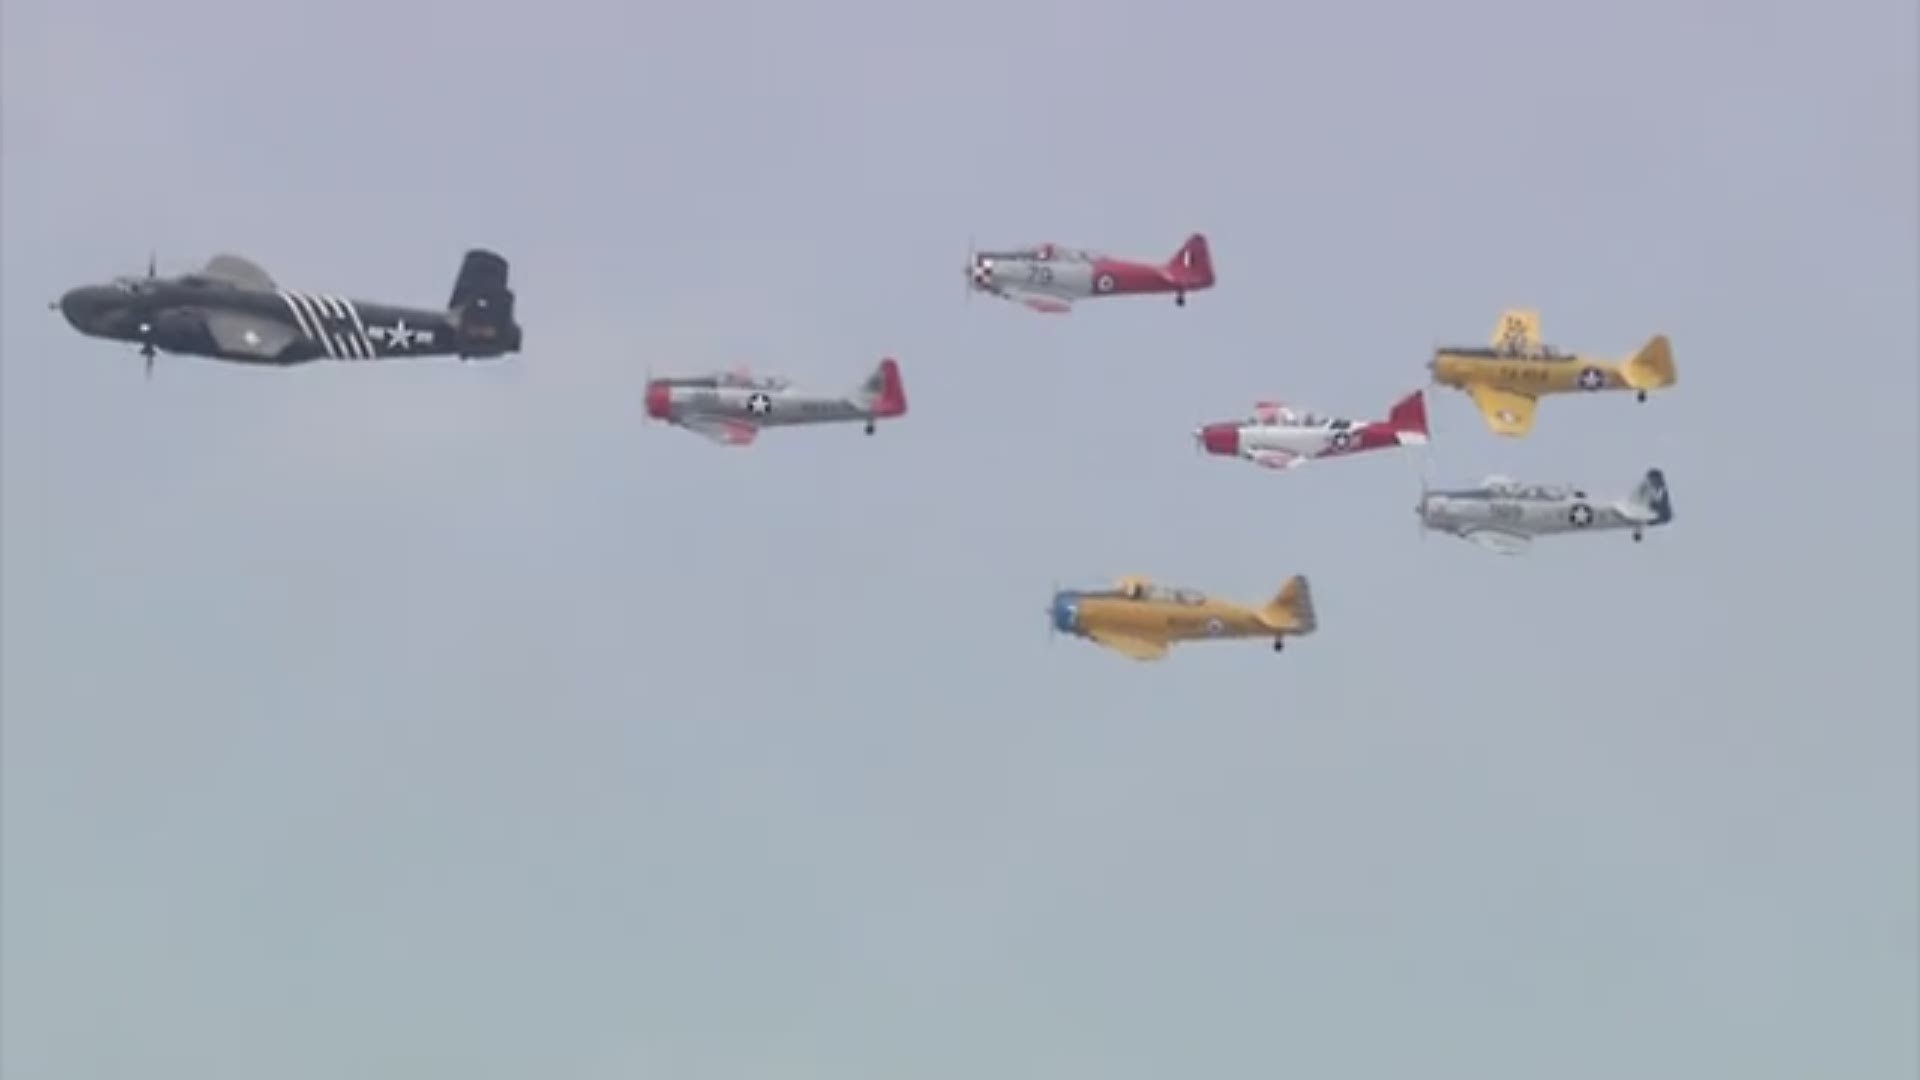 Historic warplanes from Cavanaugh Flight Museum flew over North Texas Friday morning to honor frontline workers of the COVID-19 pandemic.